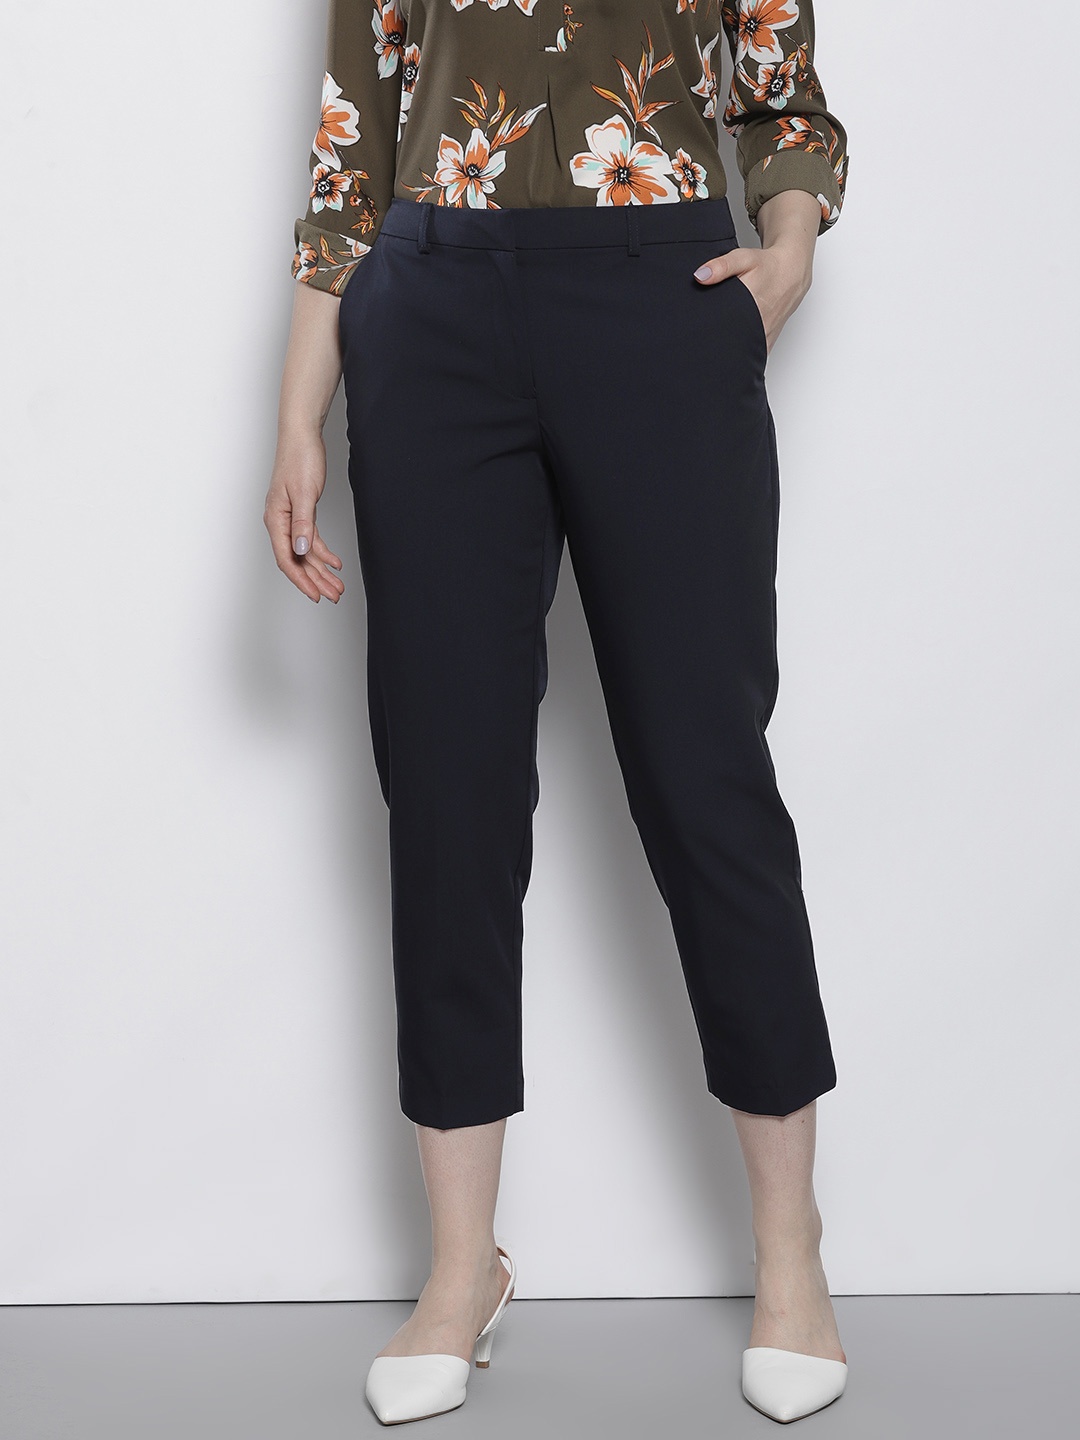 

DOROTHY PERKINS Women Navy Blue Regular Fit Solid Petite Cropped Trousers